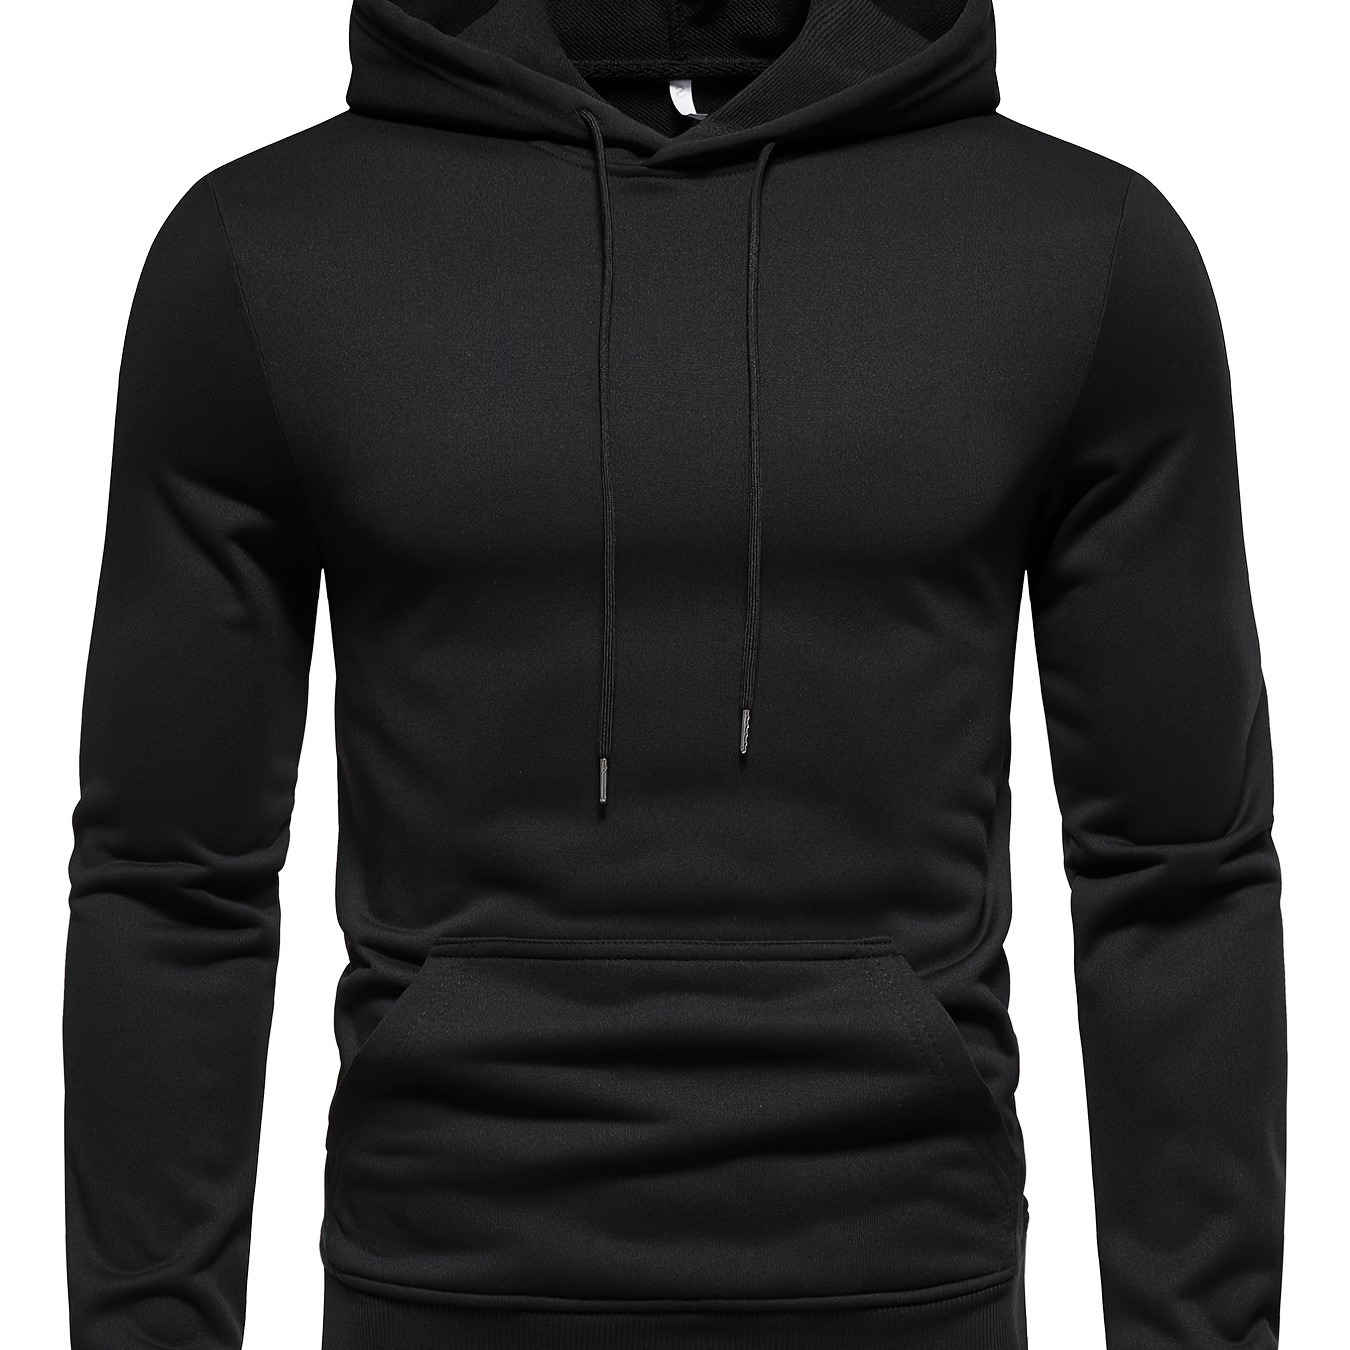 

Men's Long Sleeve Solid Hoodies Street Casual Sports And Fashionable With Kangaroo Pocket Sweatshirt, Suitable For Outdoor Sports, For Autumn And Winter, Fashionable And Versatile